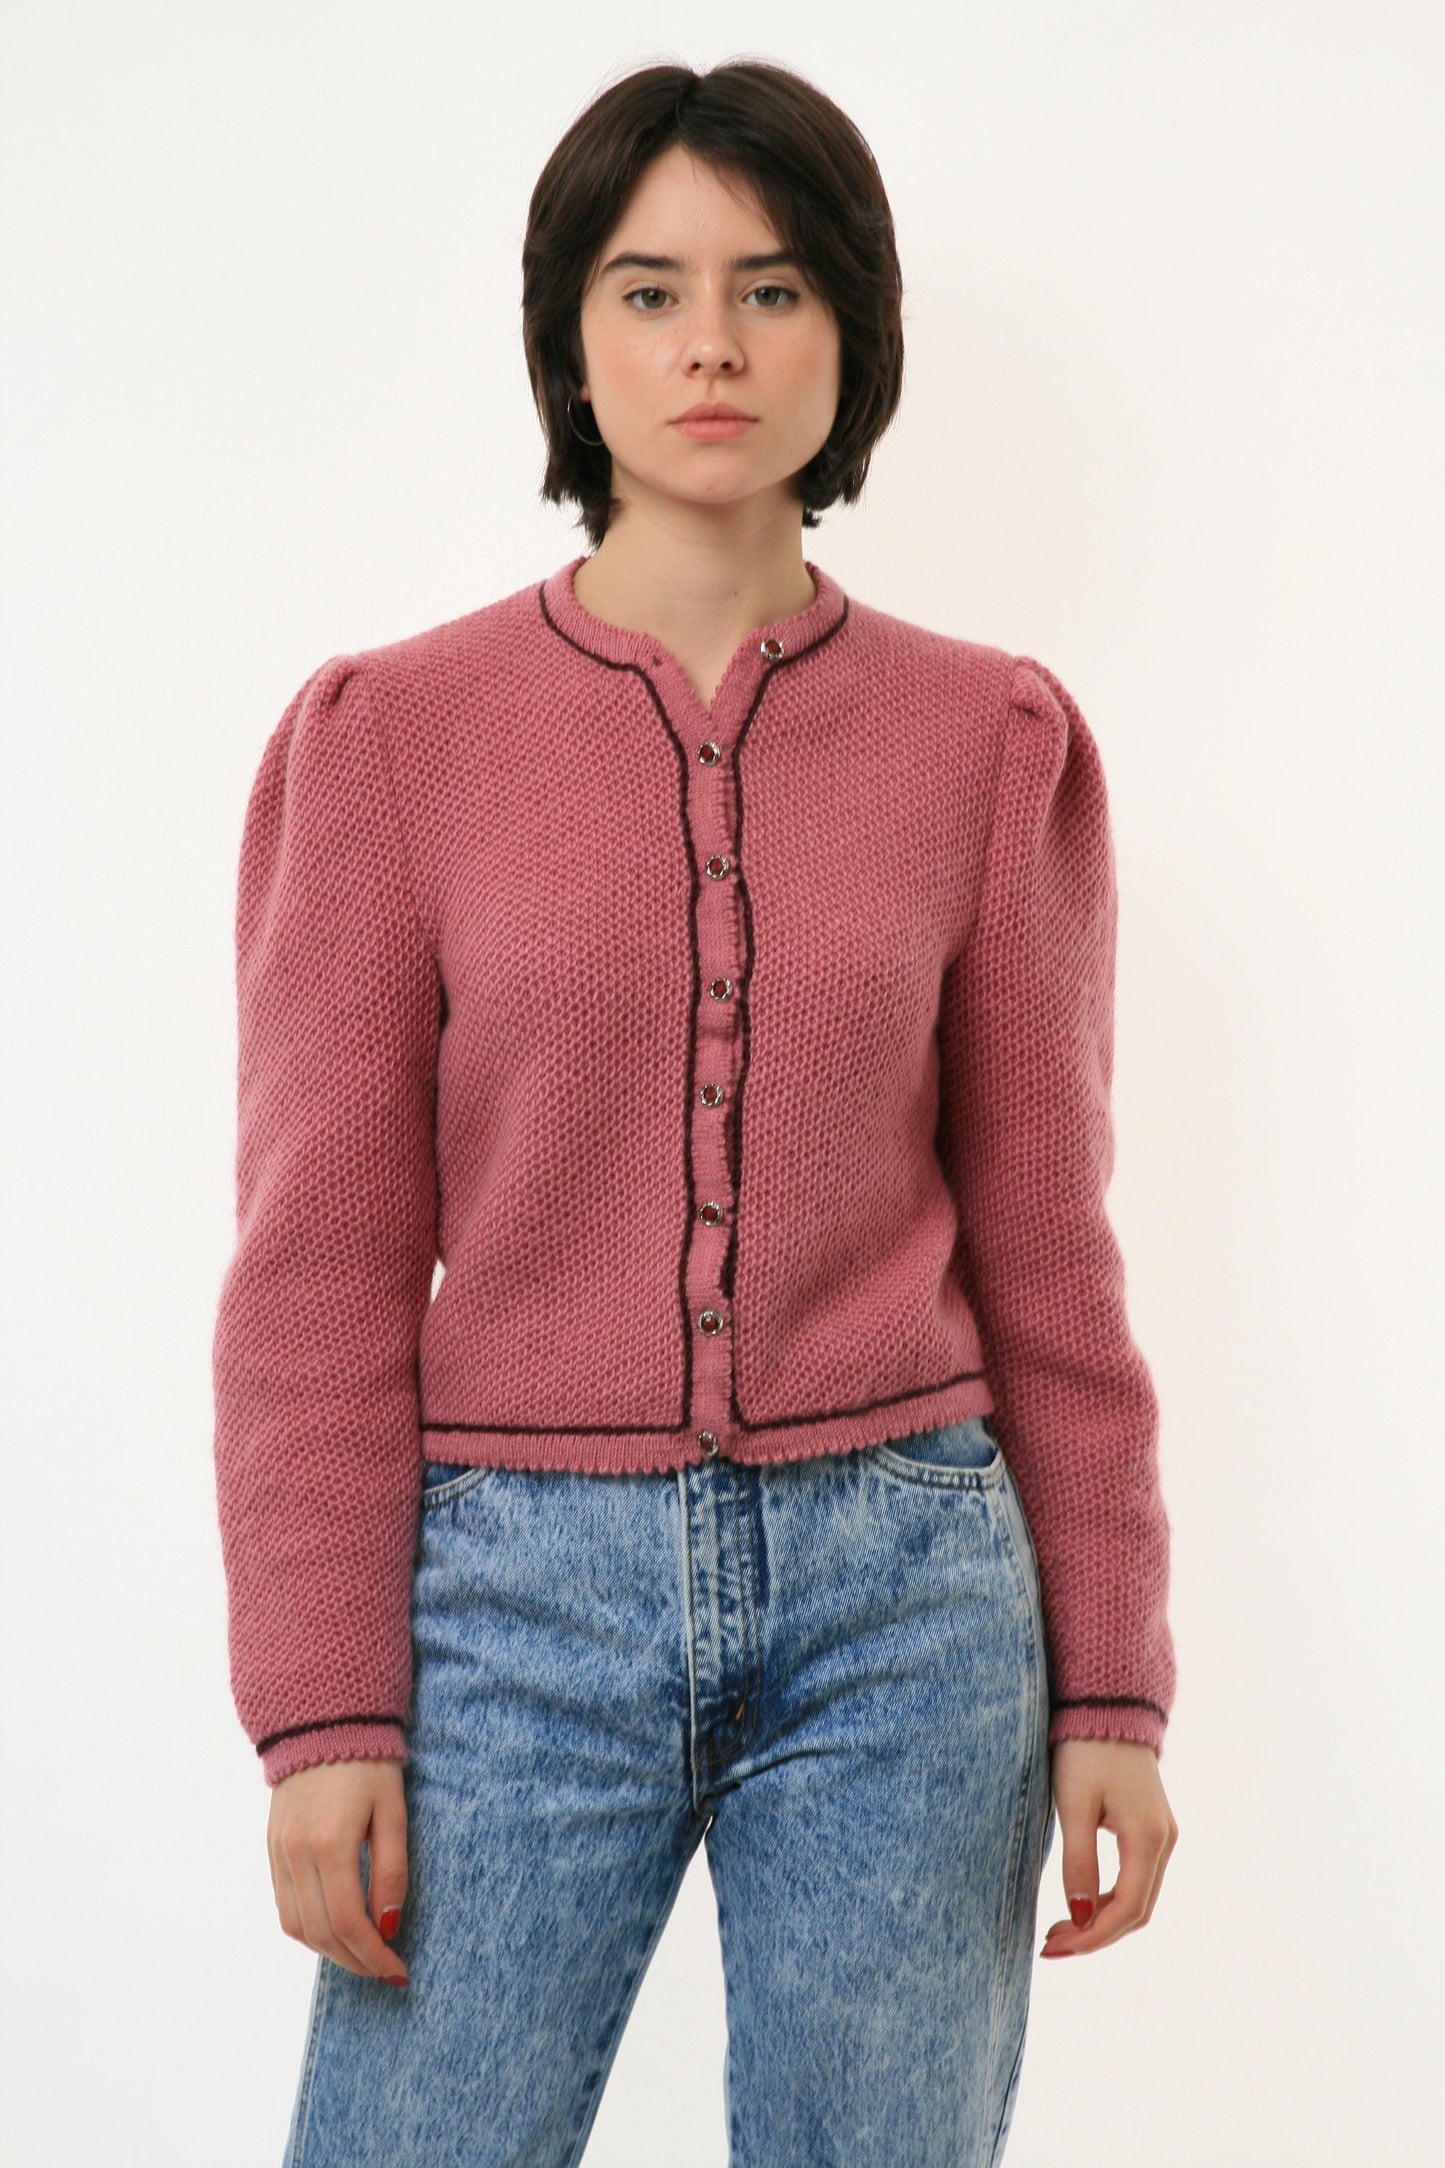 Unique Gorgeous Pink Vintage Cardigan with Puff Sleeve Folk Cardigan Knitted Jacket Handmade Embroidery Wool Retro Hand knit